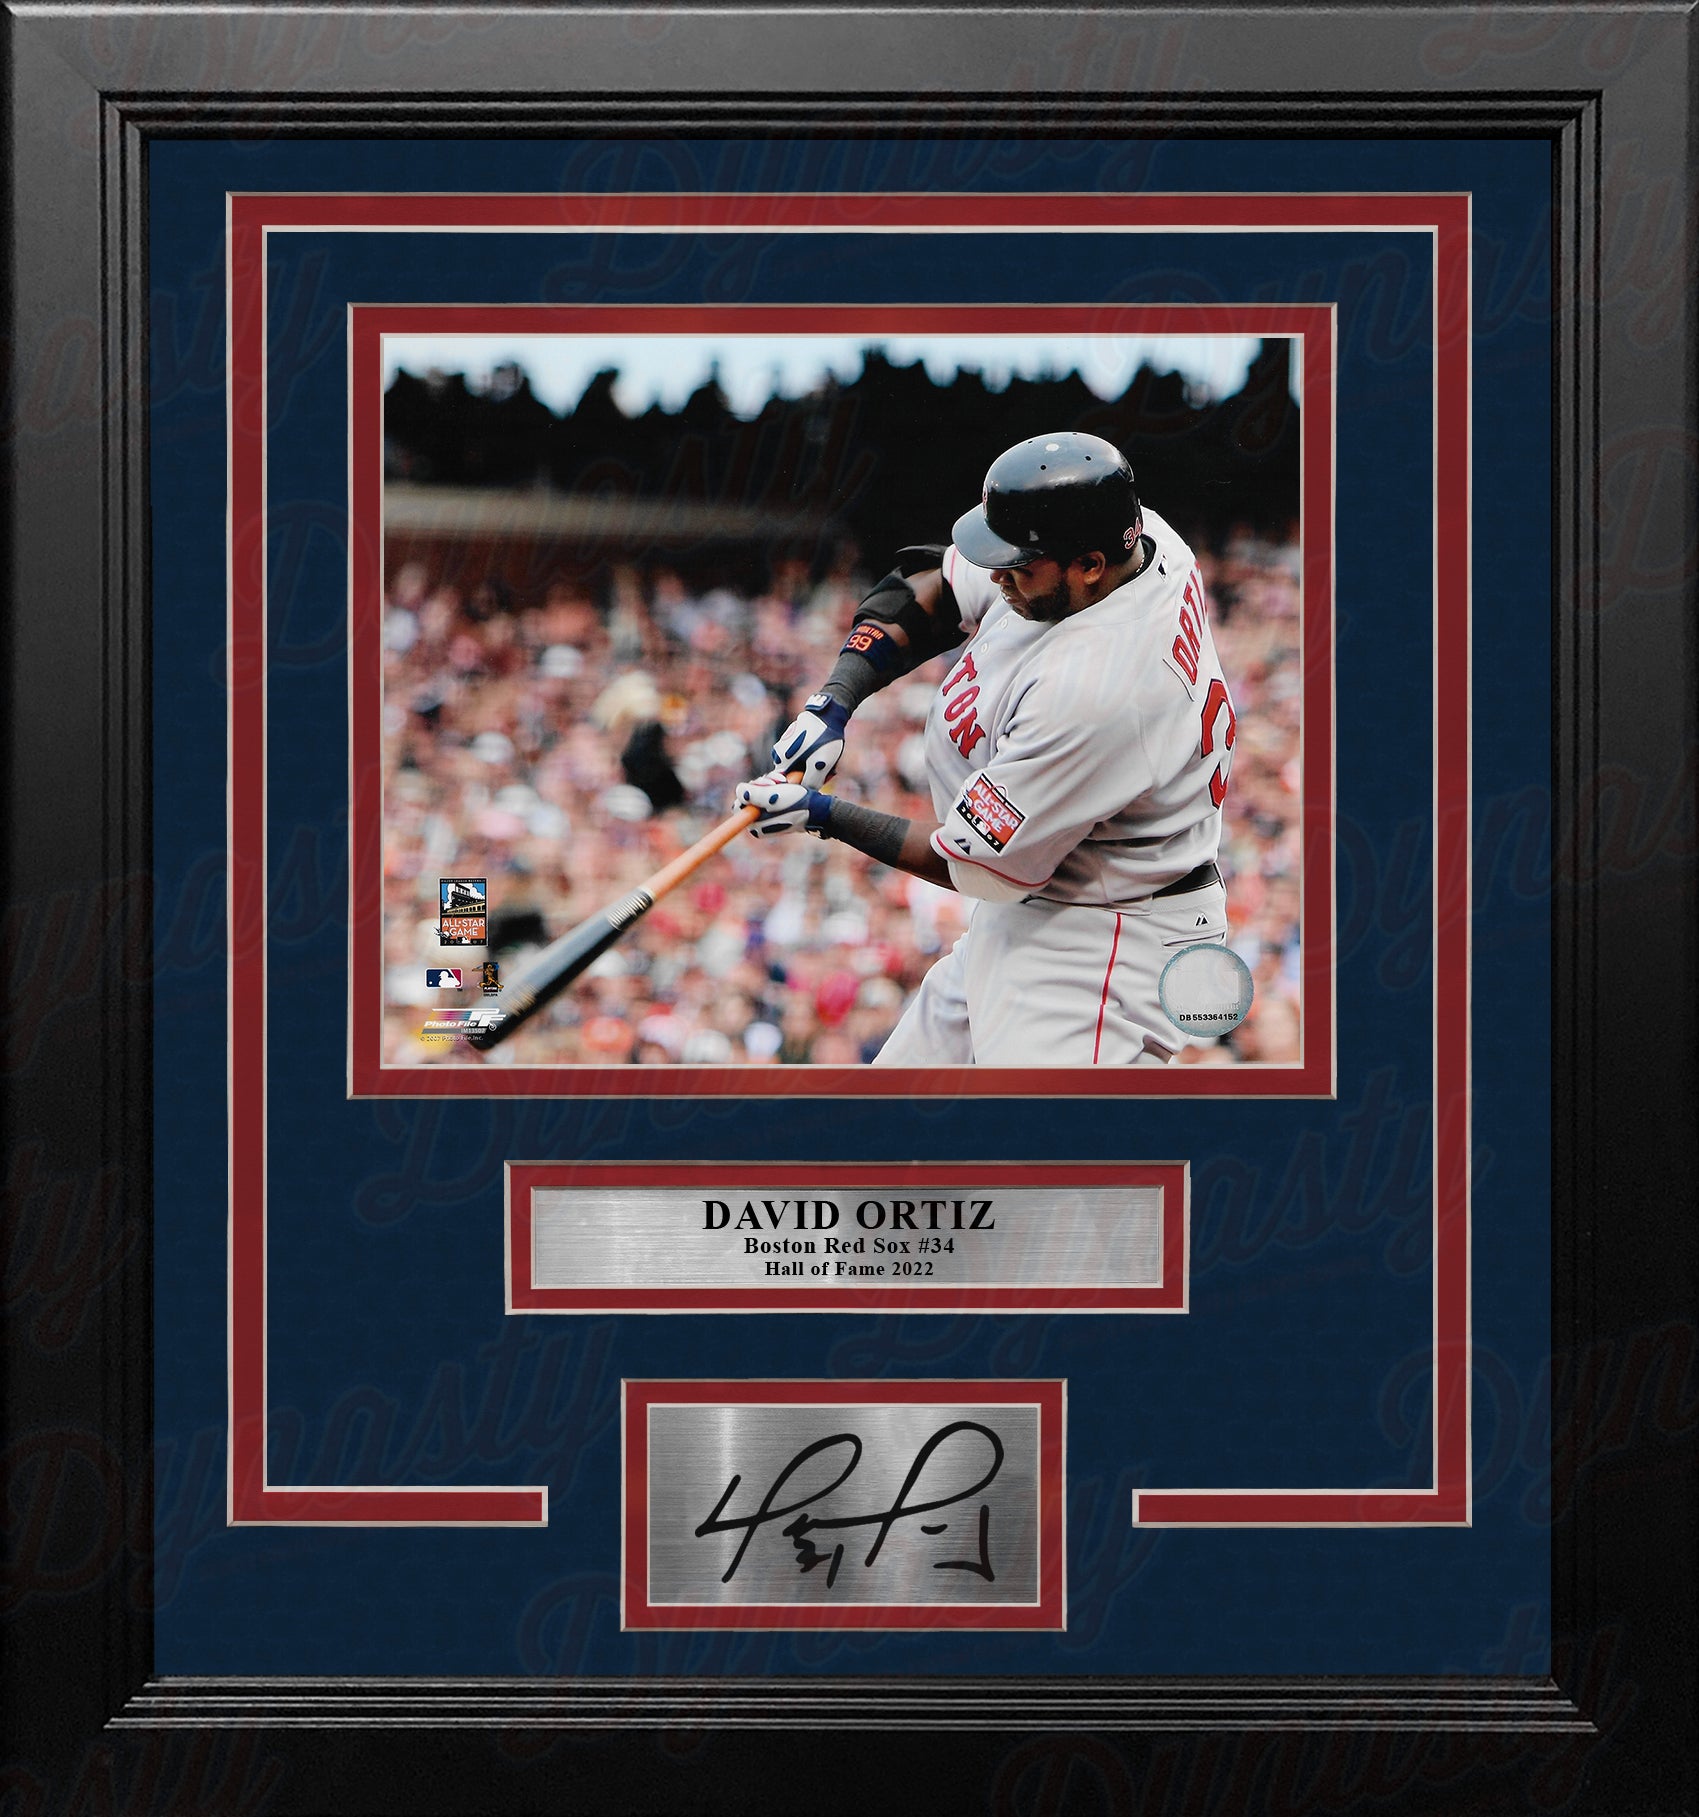 David Ortiz Close-Up Swing Boston Red Sox 8 x 10 Framed Baseball Photo  with Engraved Autograph